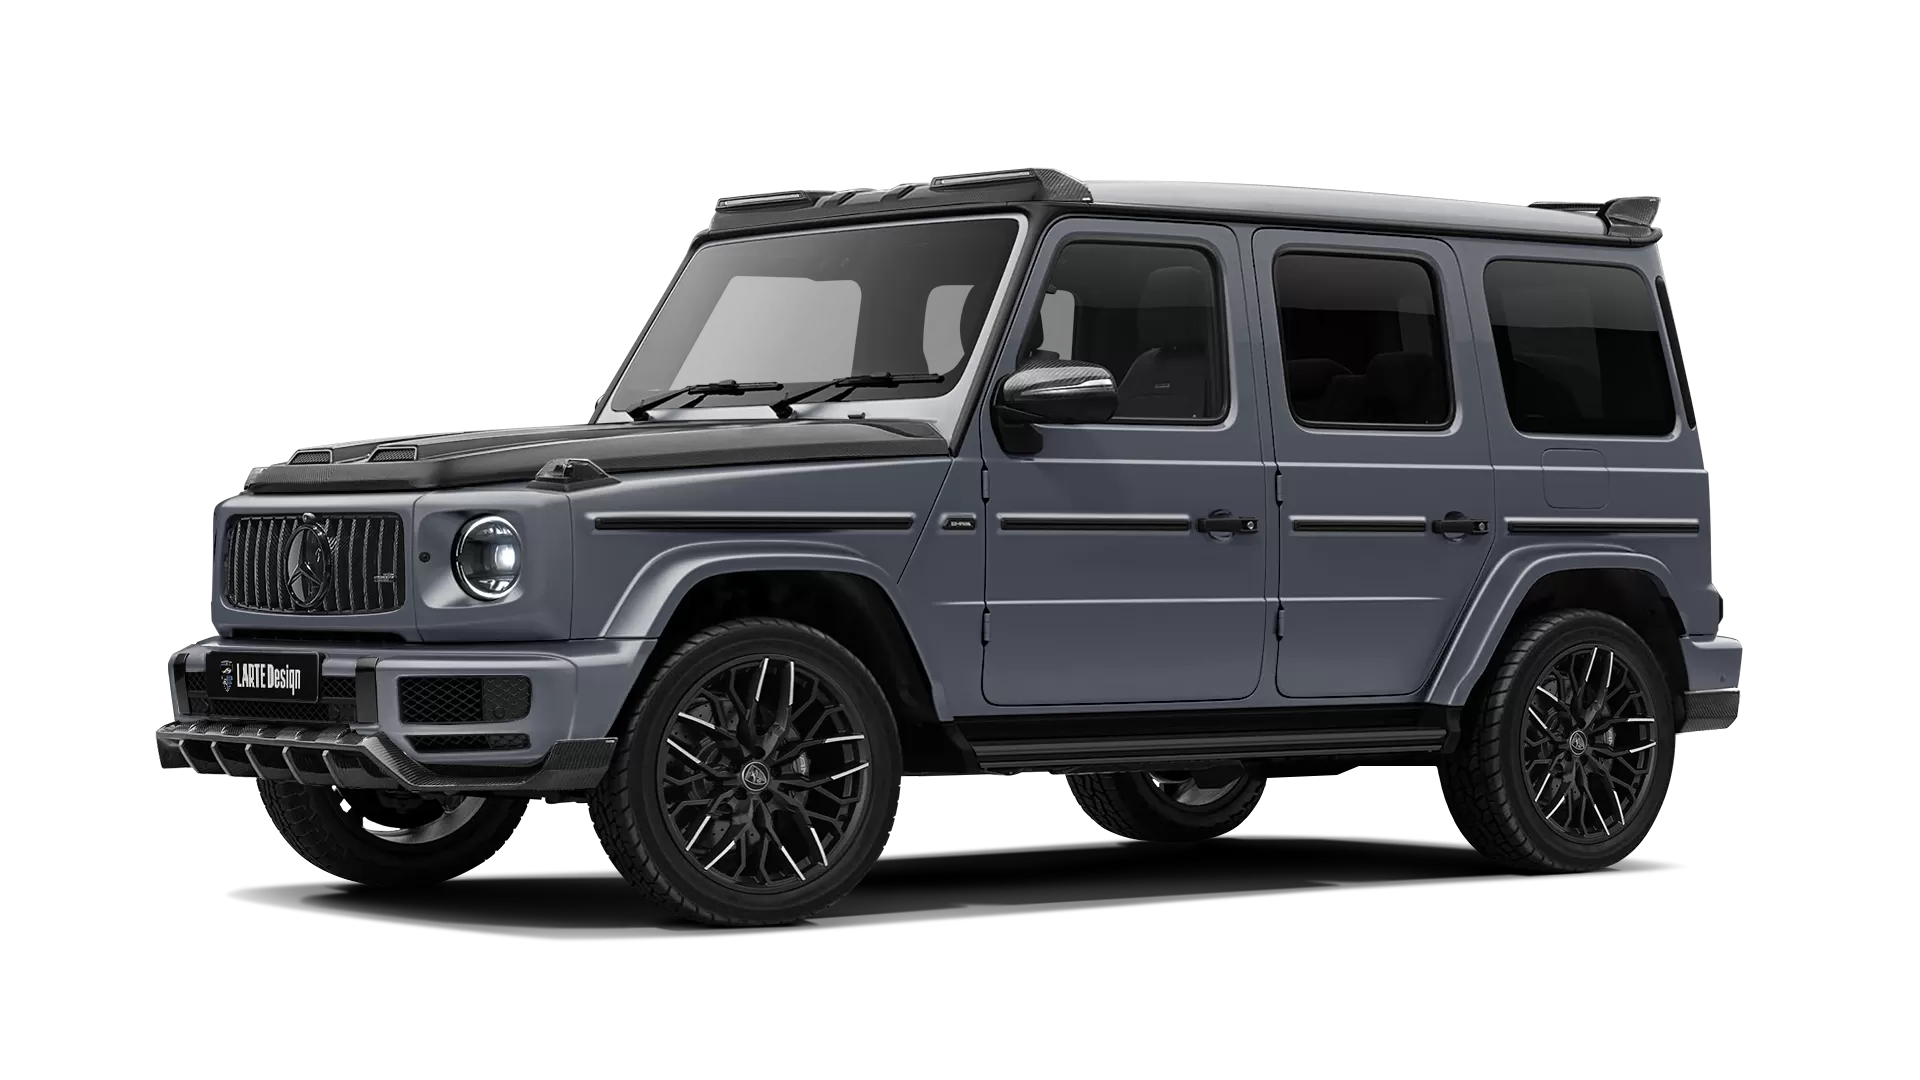 Mercedes G class W463 with carbon body kit: front view shown in Platinum Magno